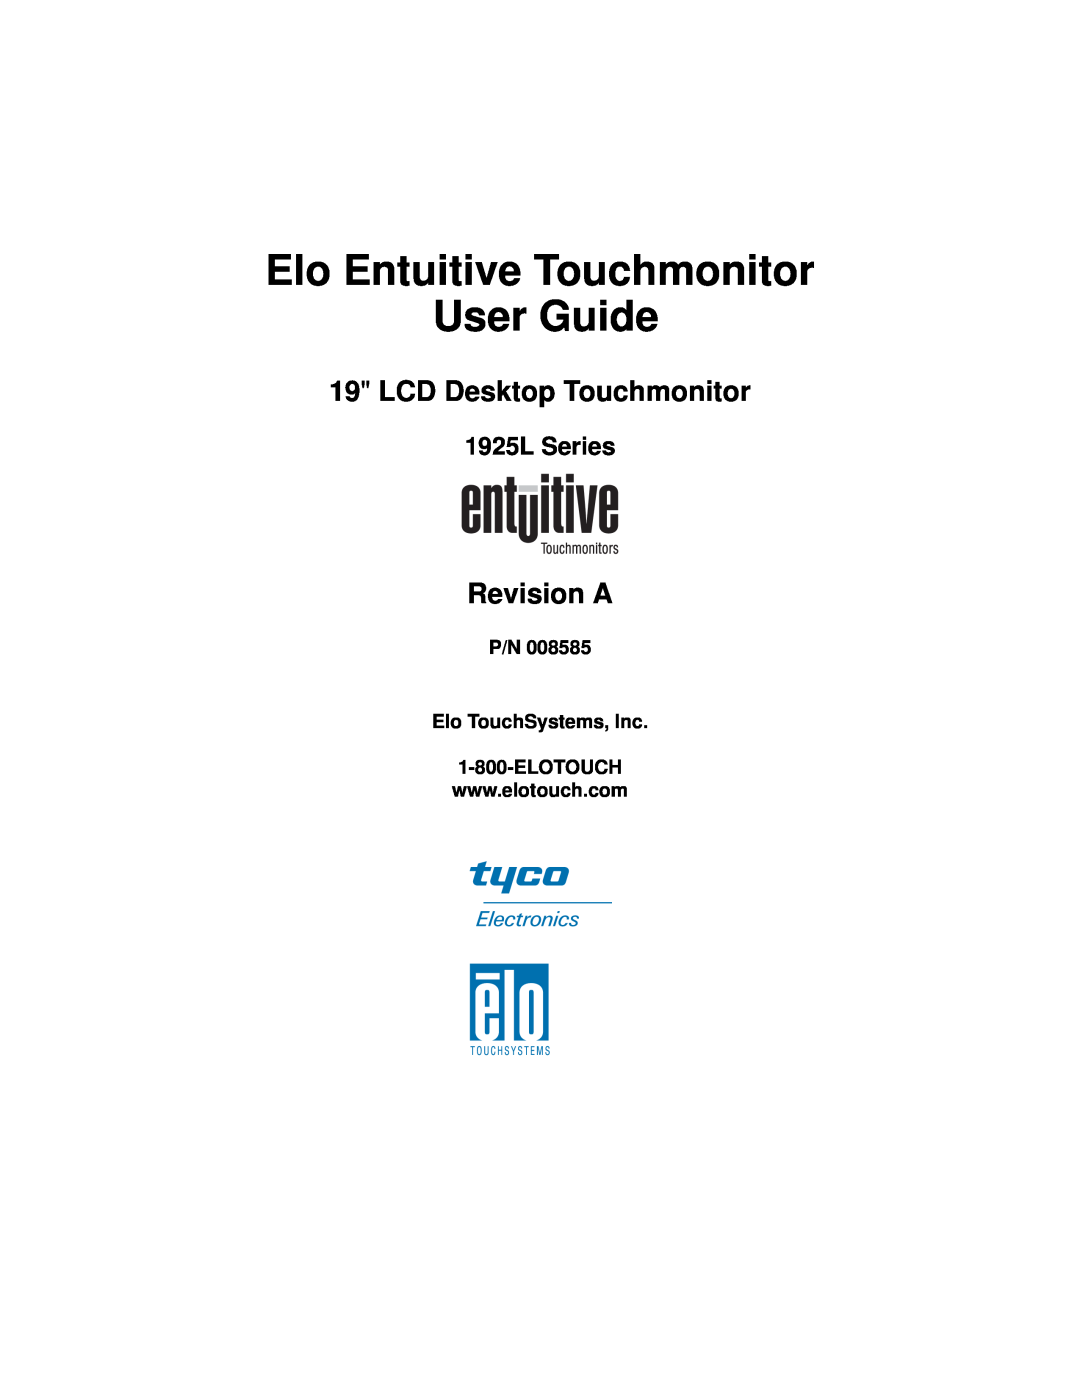 Elo TouchSystems manual Elo Entuitive Touchmonitor User Guide, LCD Desktop Touchmonitor, Revision A, 1925L Series 